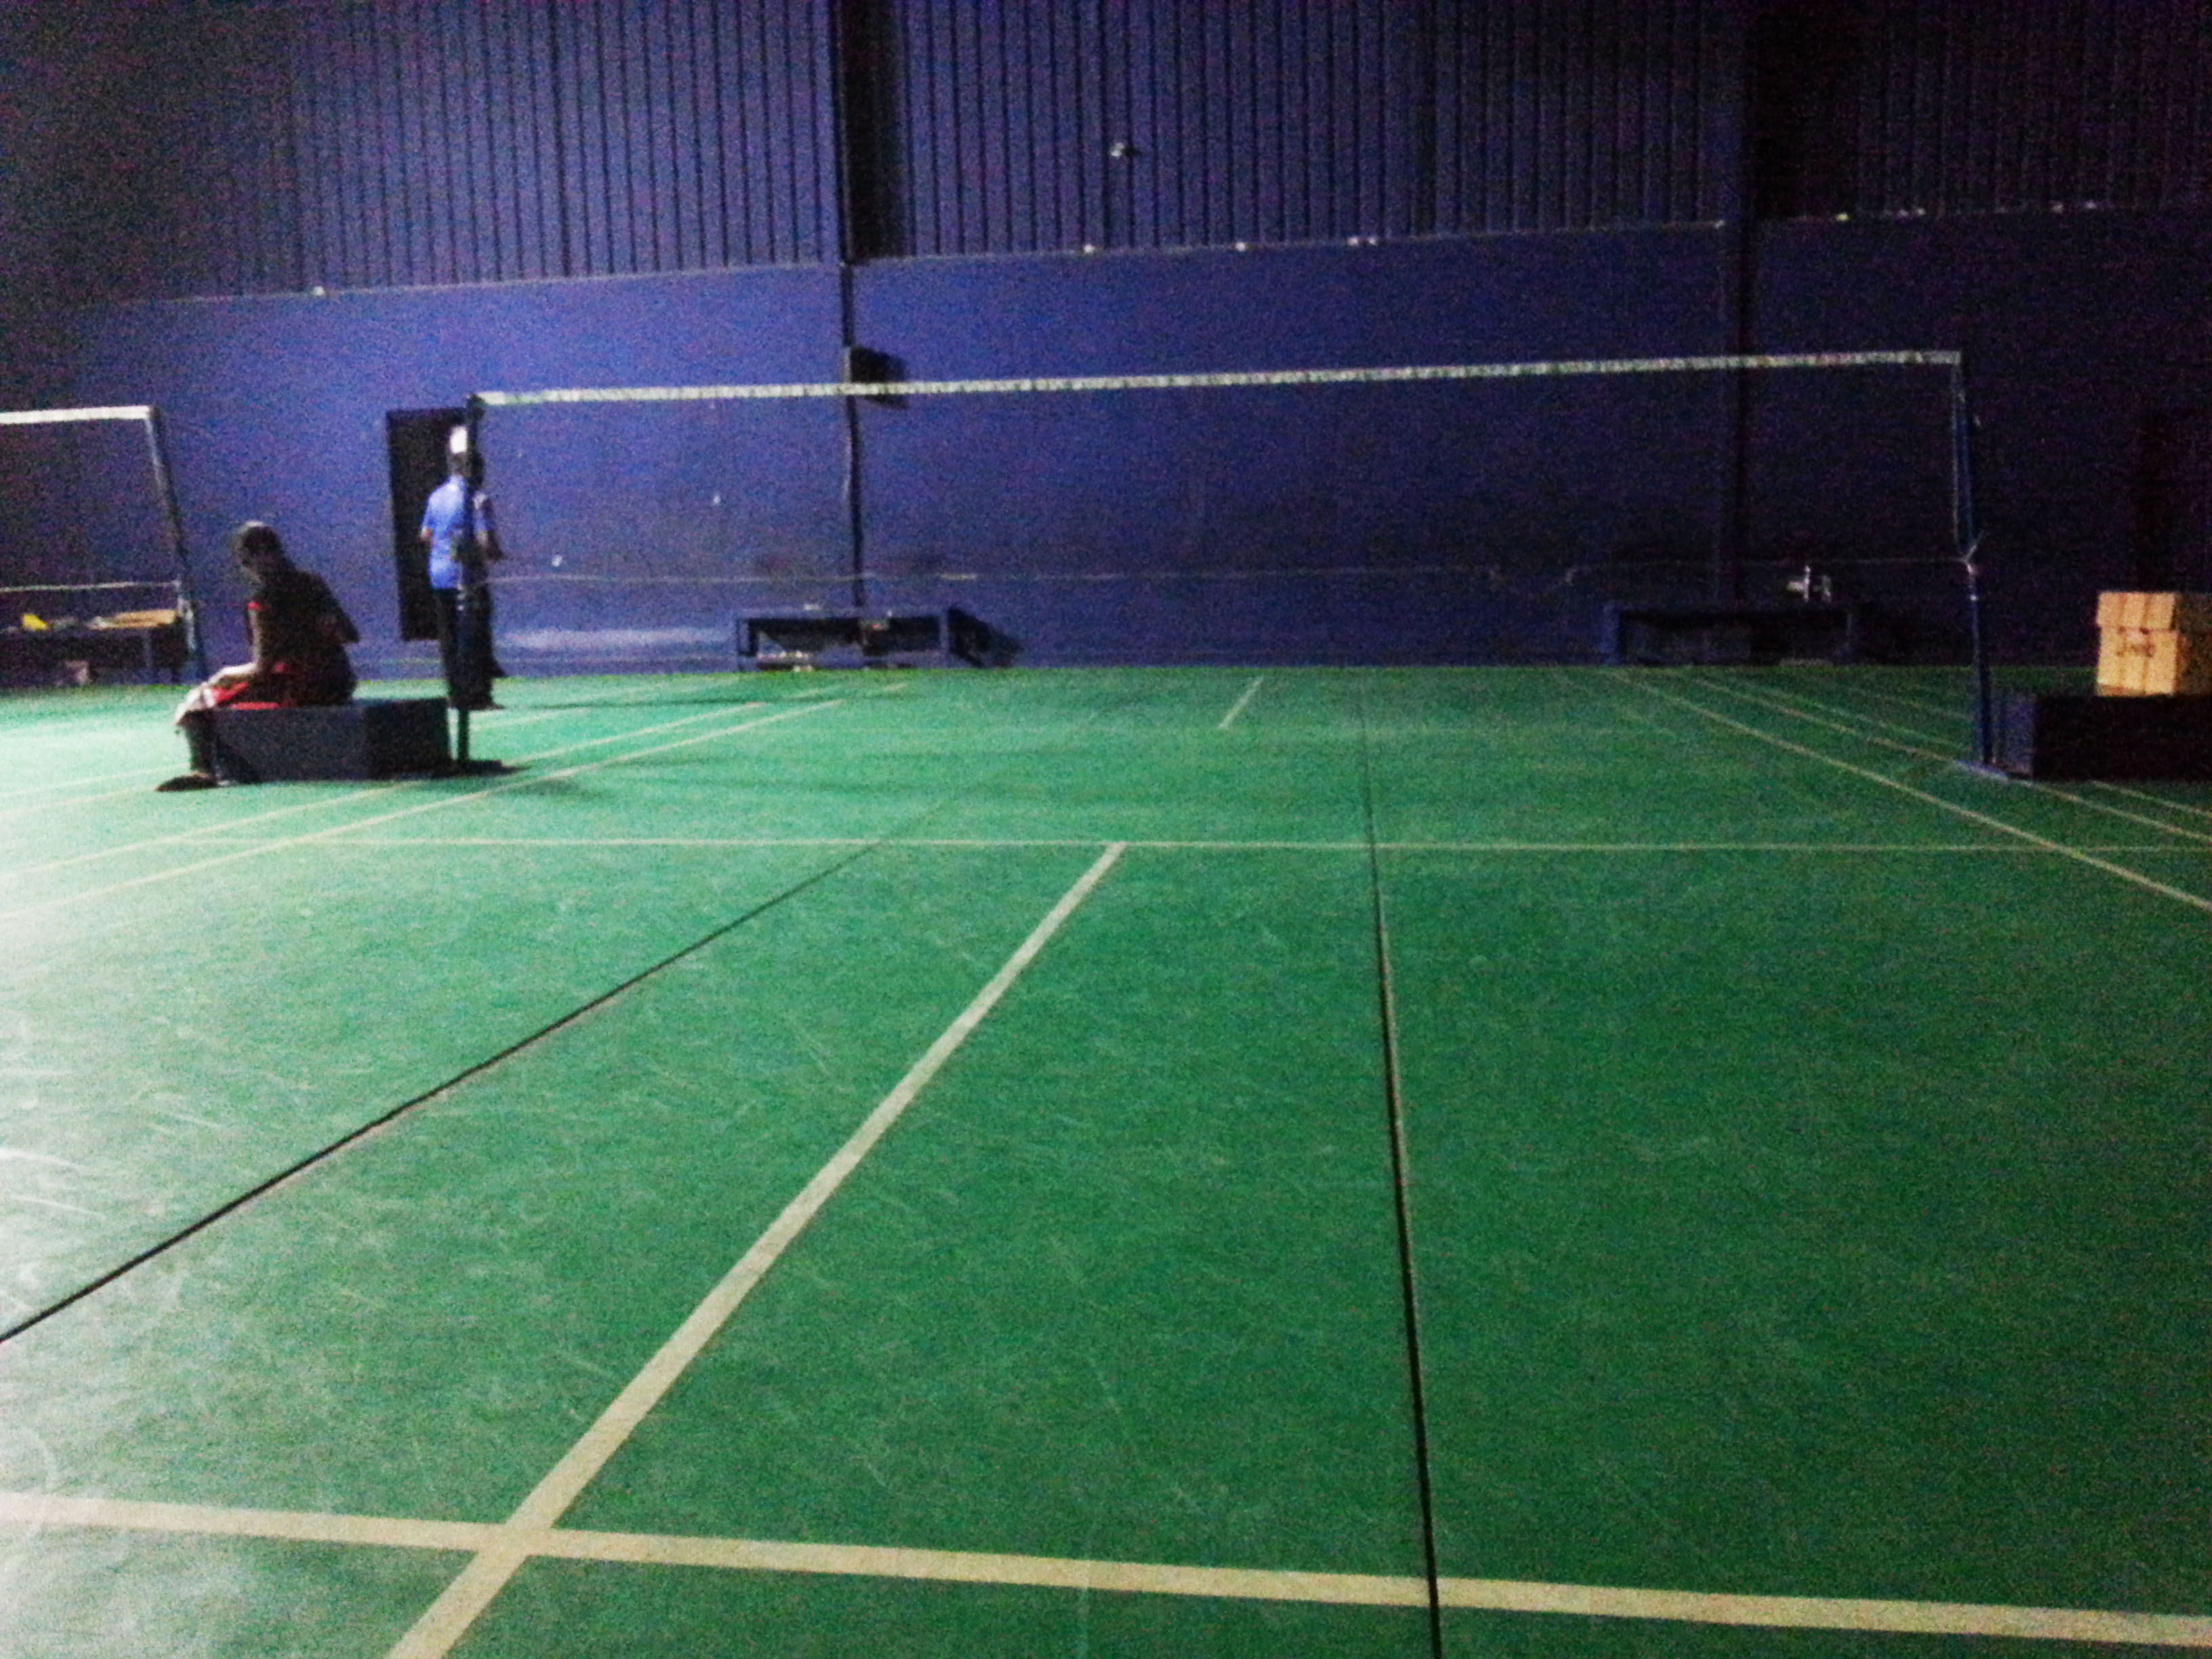 Layout of the Badminton Court at the venue